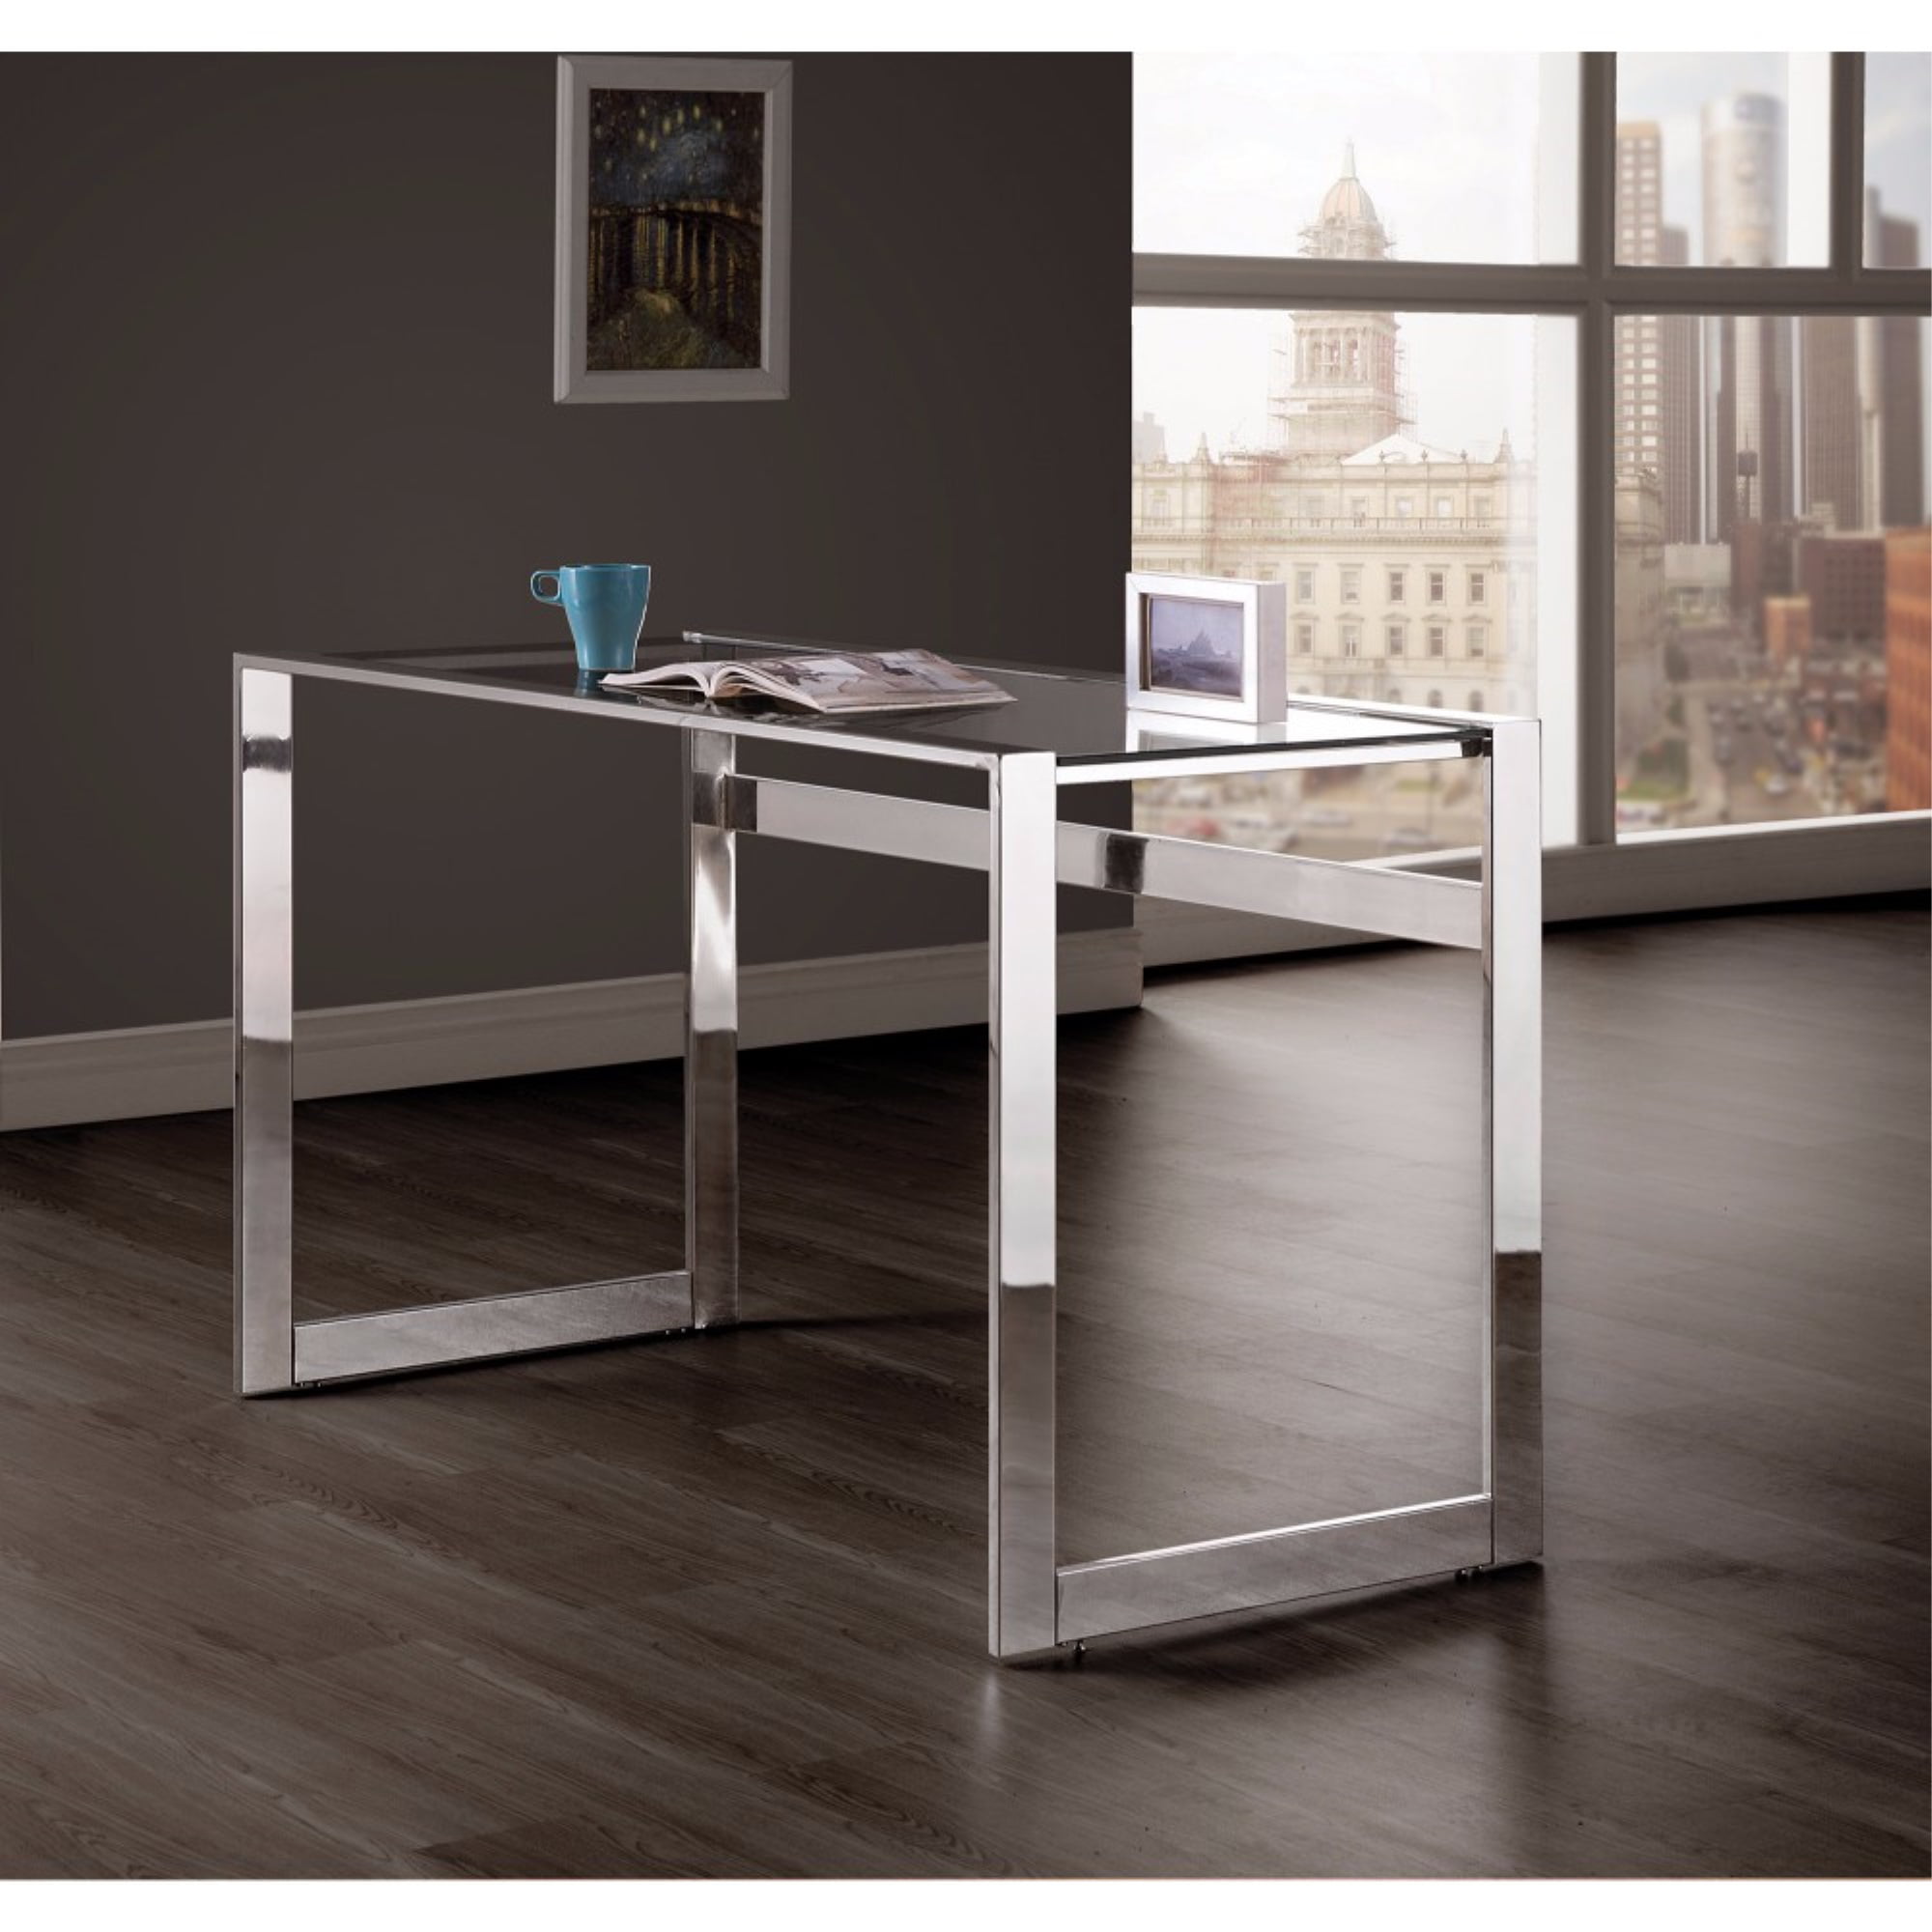 Details about   Coaster CO Writing Desk Chrome 